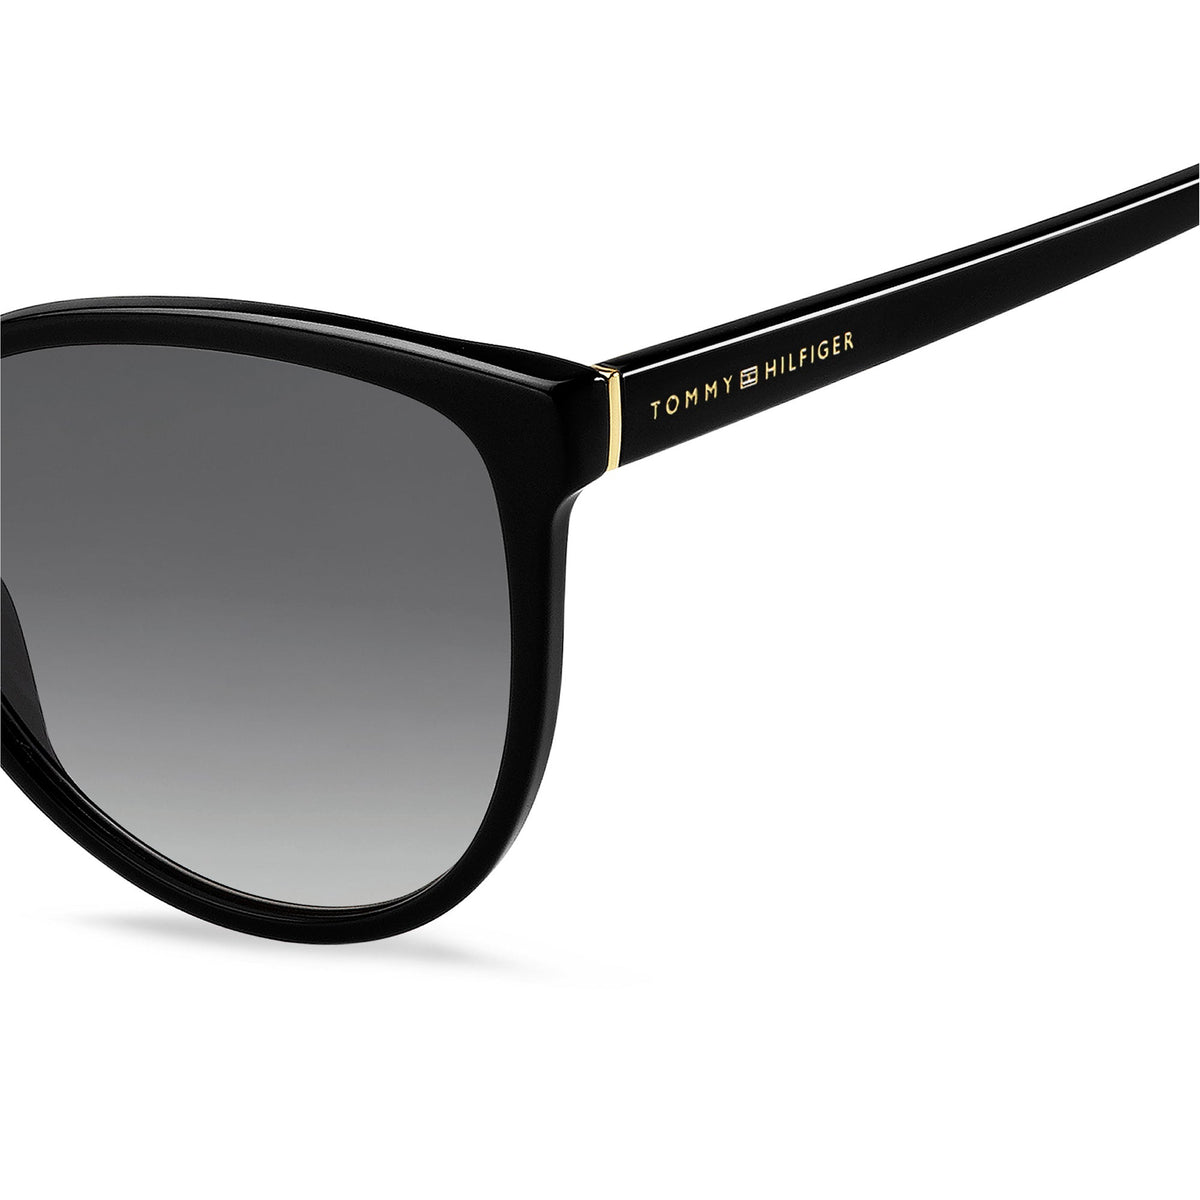 Tommy Hilfiger TH 1670/S 807 579O Unisex Black Sunglasses from